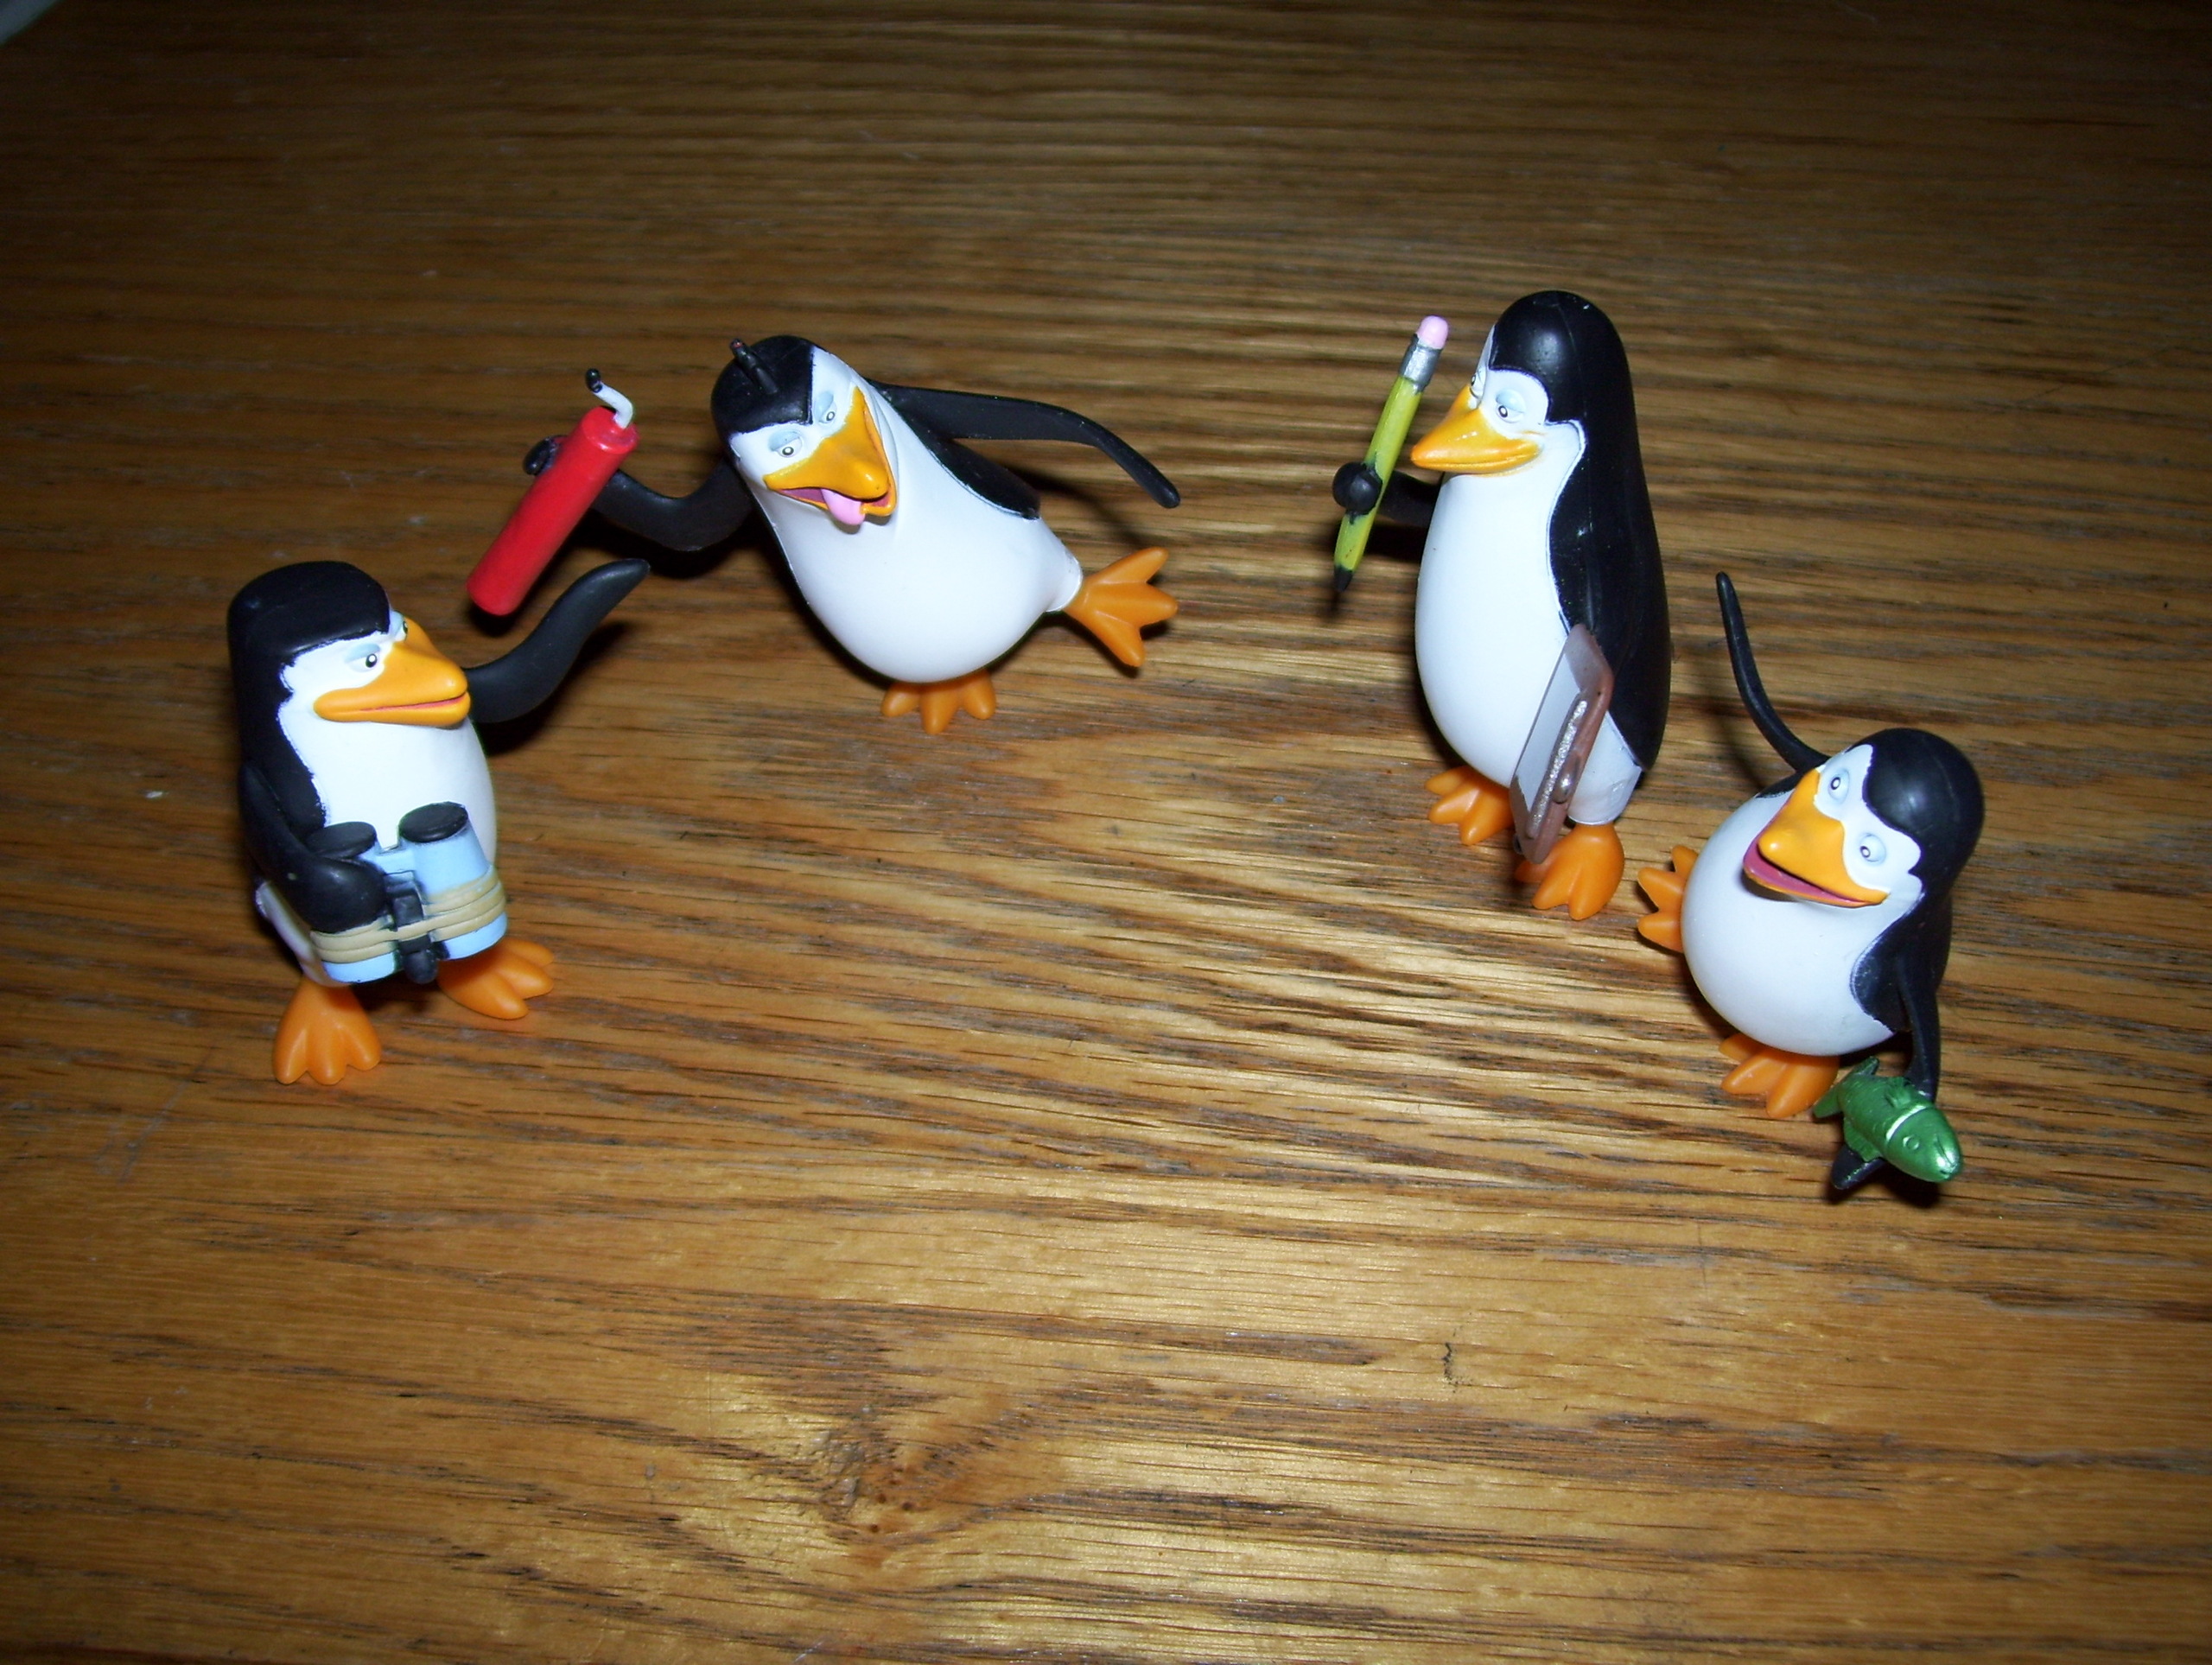 Penguins of Madagascar images The Penguins Stand on Their Own Two